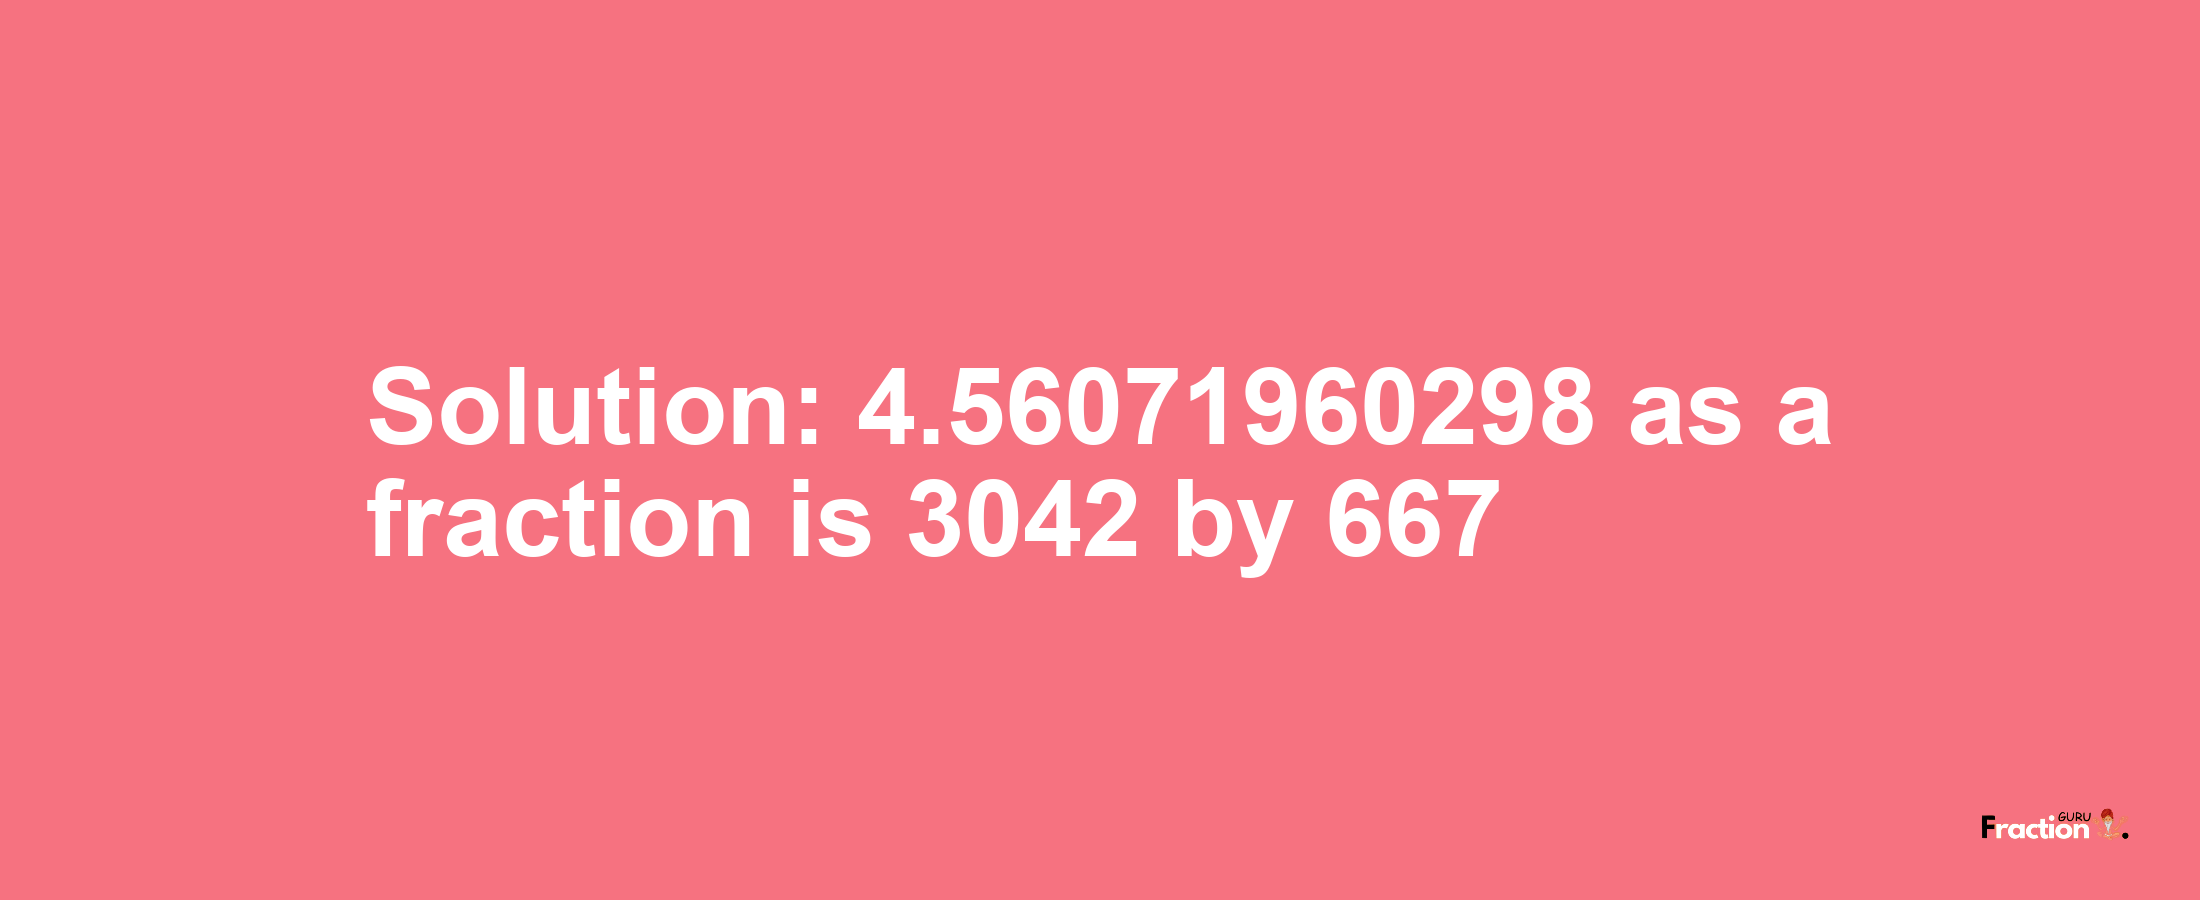 Solution:4.56071960298 as a fraction is 3042/667